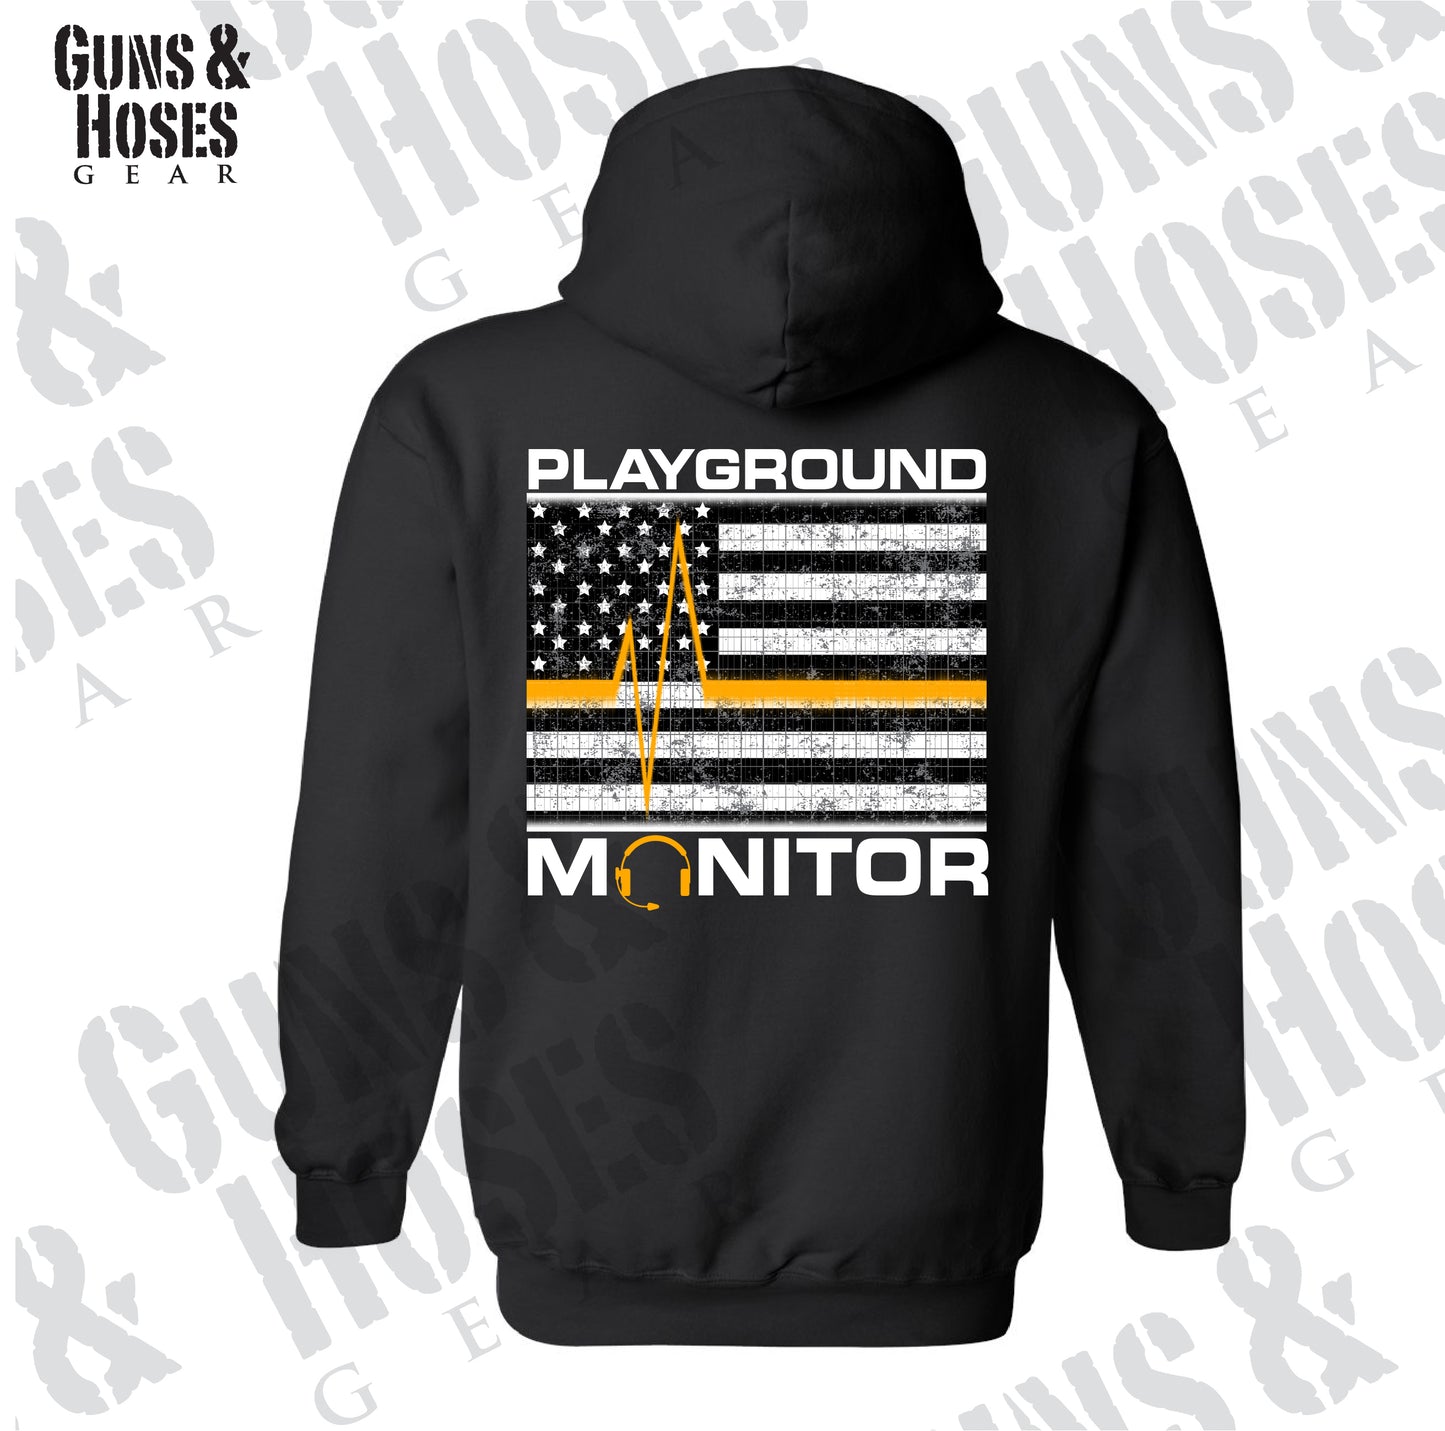 Playground Monitor Hoodie - Dispatcher, 911 Communications, Gold Line, Funny Dispatch, Dispatcher Gift